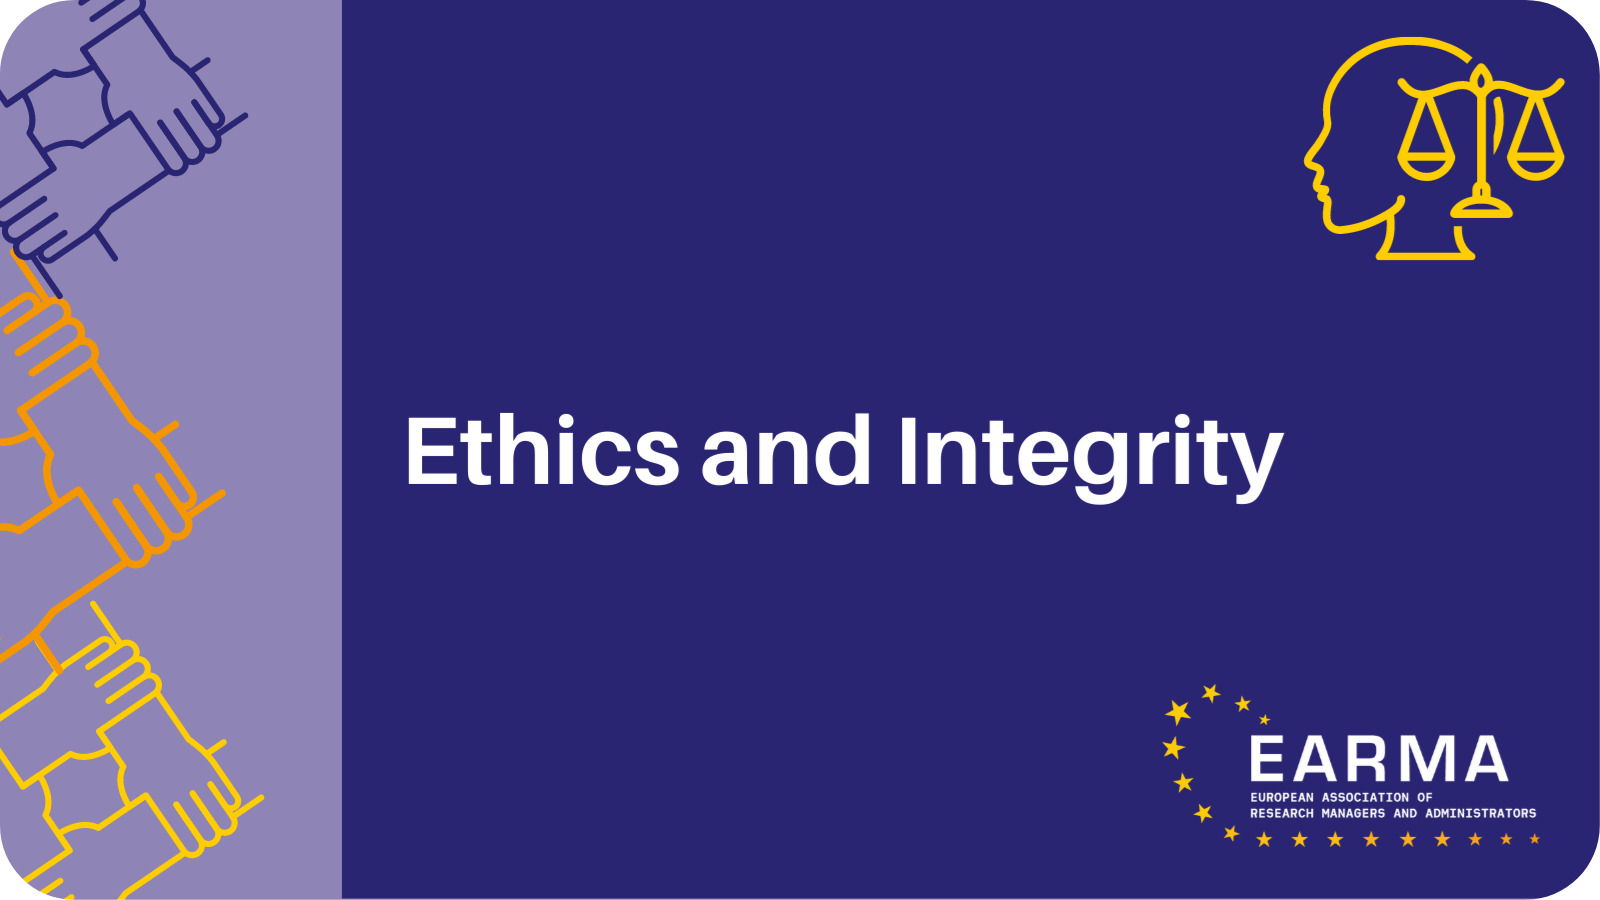 Ethics and integrity